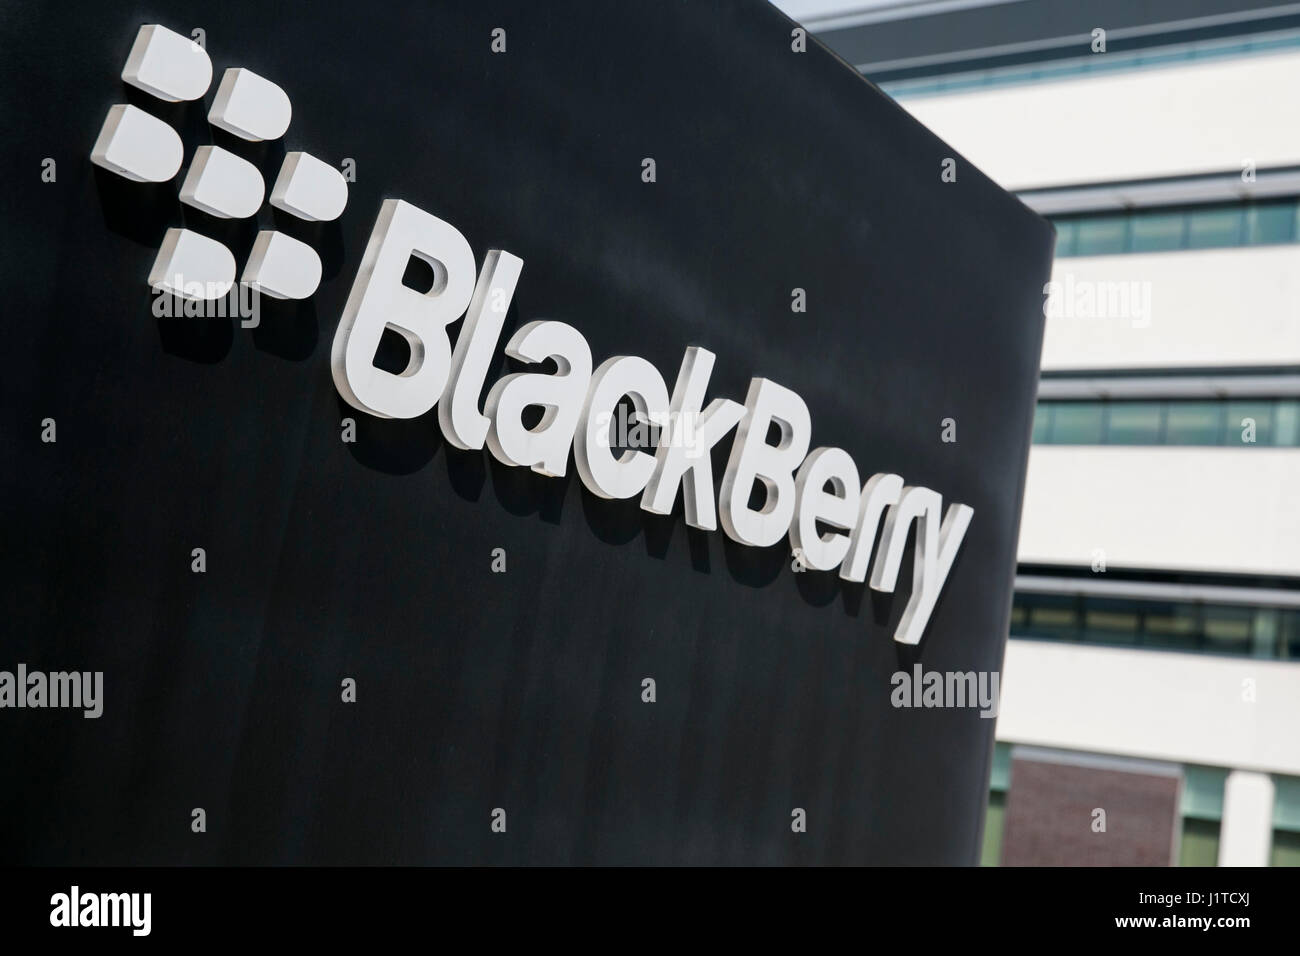 A logo sign outside of the headquarters of BlackBerry Limited, in Waterloo, Ontario, Canada, on April 15, 2017. Stock Photo